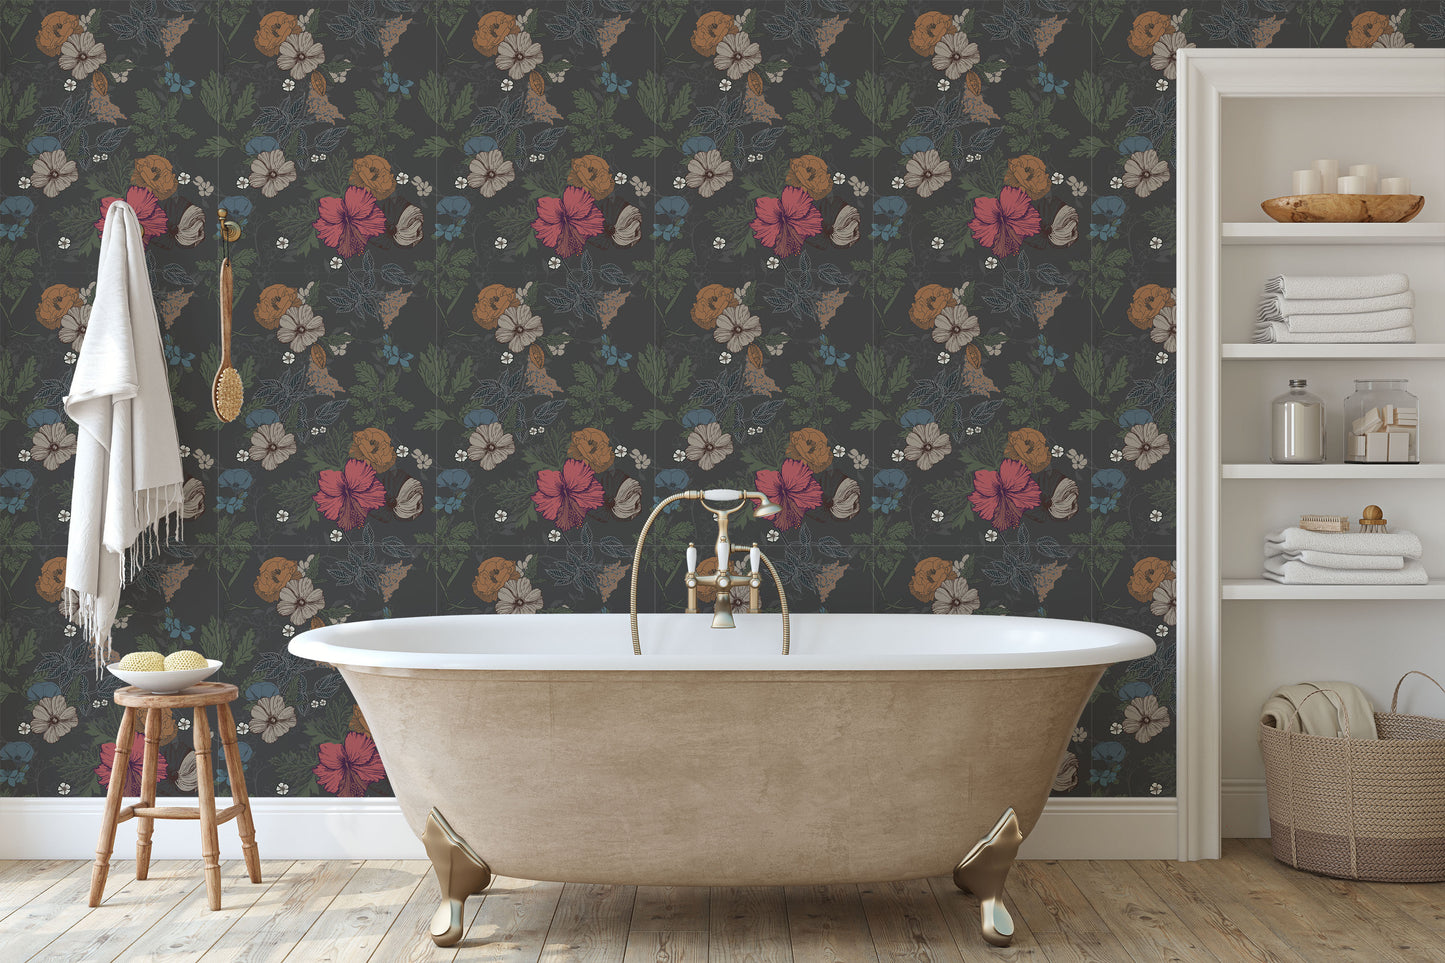 Pink/rose, blue, green and taupe floral pattern on teal background easy to install and remove peel and stick custom wallpaper available in different lengths/sizes locally created and printed in Canada Artichoke wallpaper. Washable, durable, commercial grade, removable and waterproof.